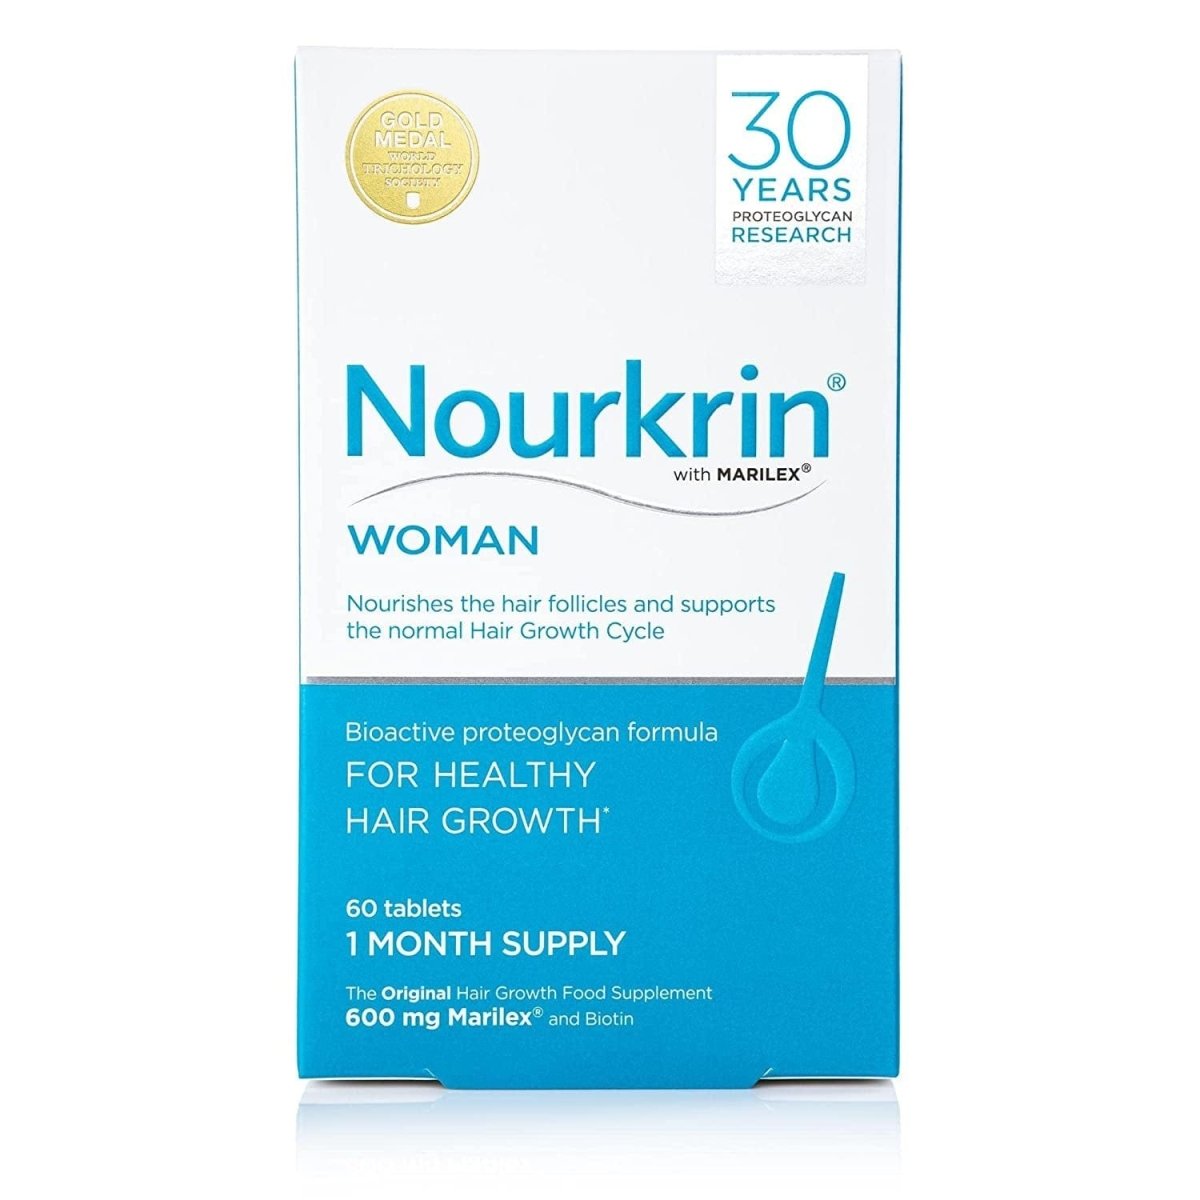 Nourkrin Woman Hair Supplement - 60 Tablets, 1 Month Supply